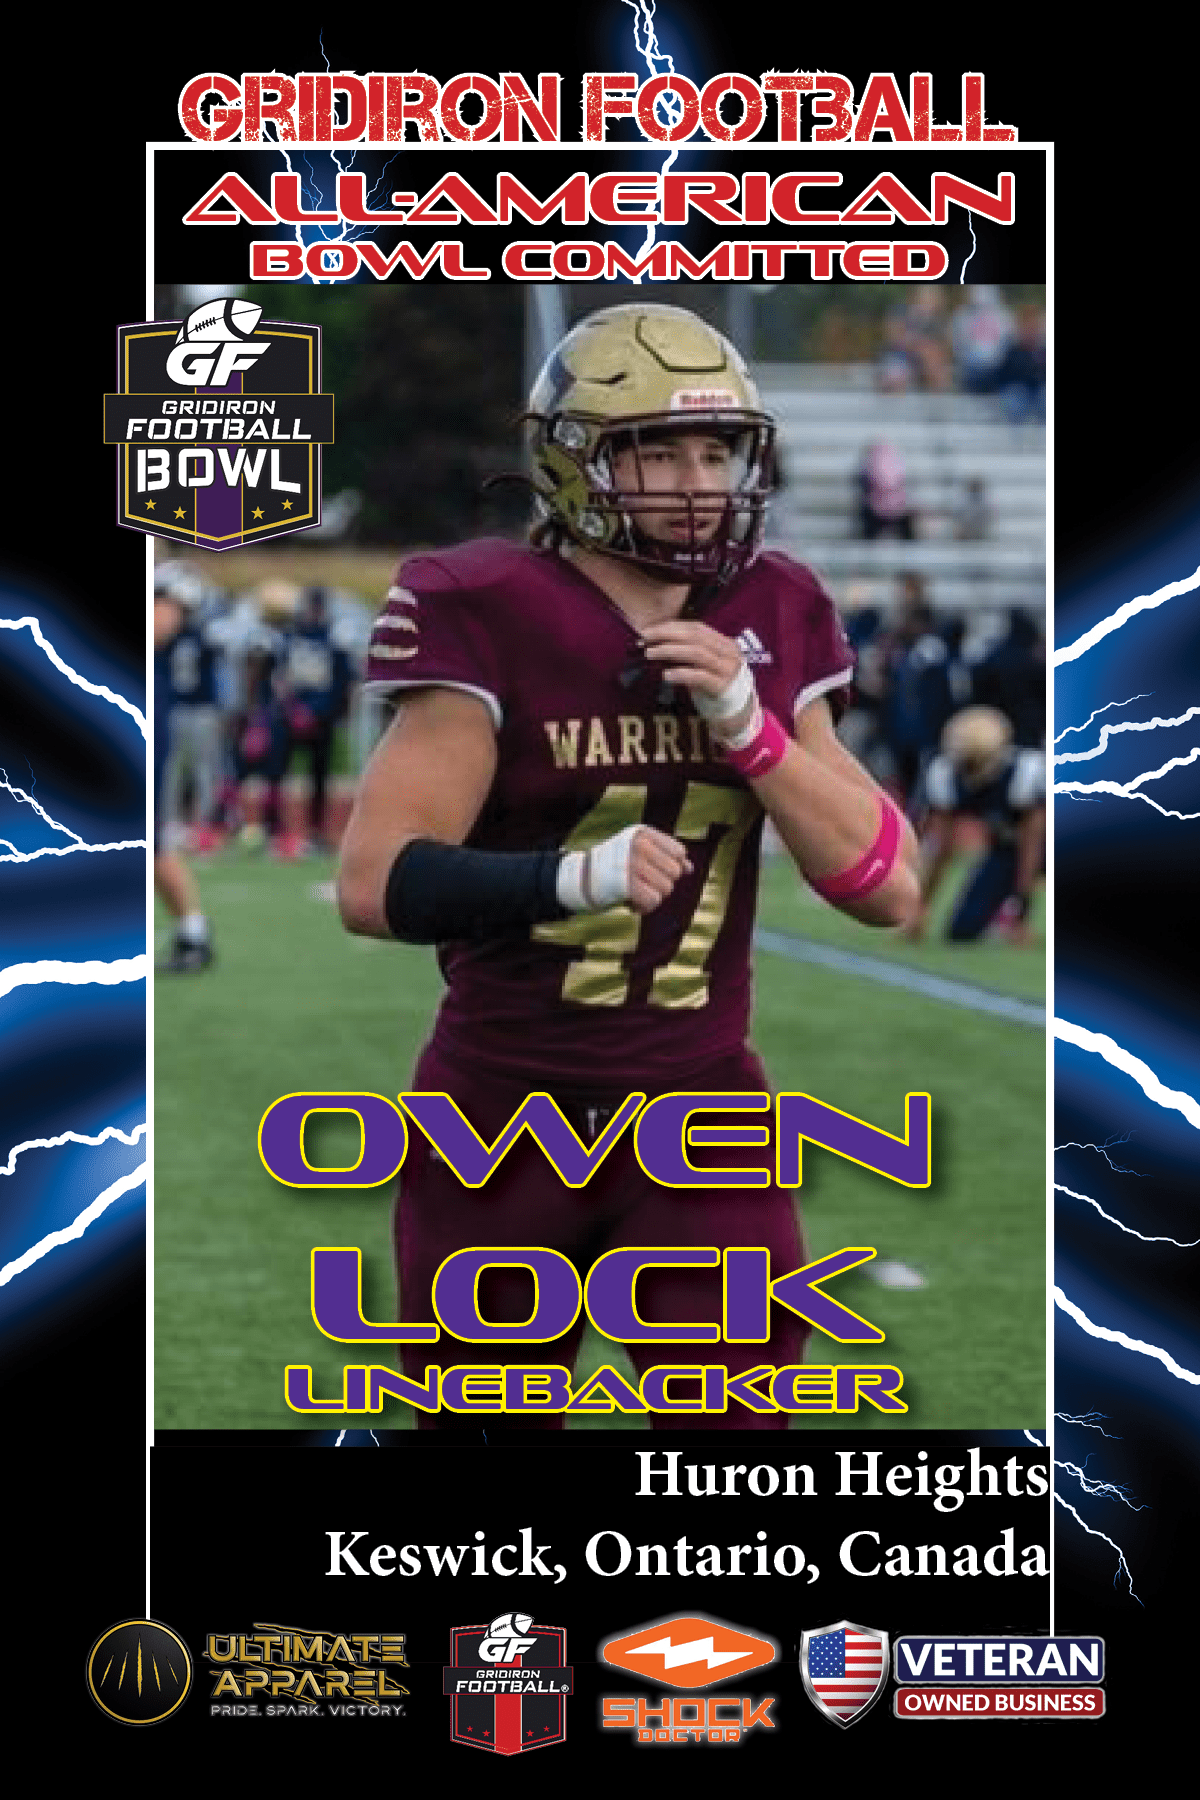 BREAKING NEWS: Huron Heights (Newmarket, Ontario, Canada) LB Owen Lock Commits To The Gridiron Football All-American Bowl Game